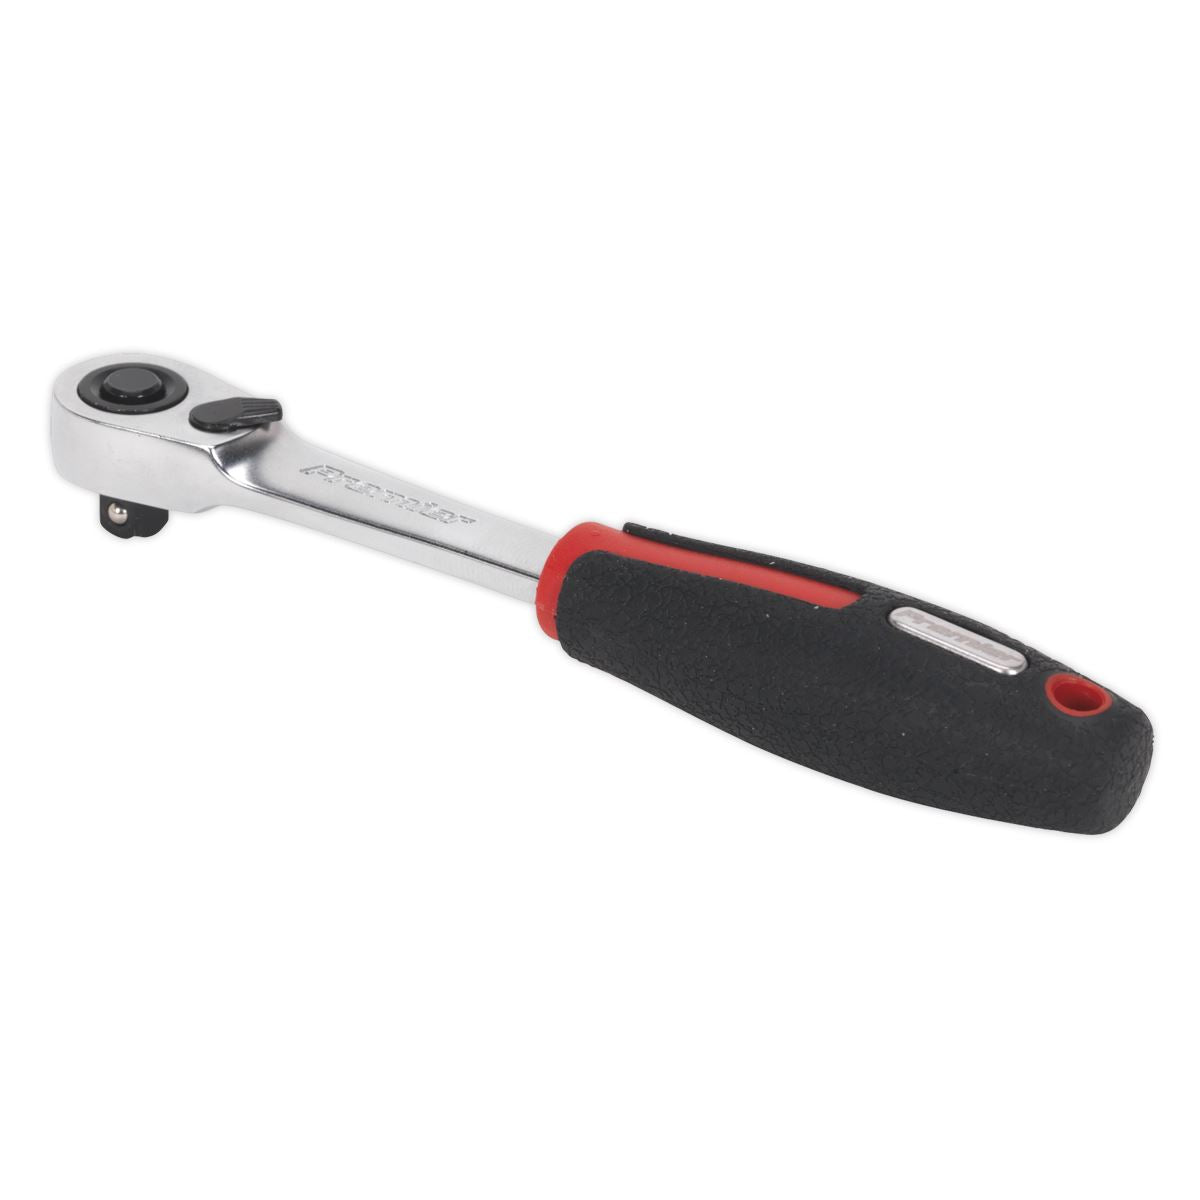 Sealey Premier Ratchet Wrench 1/4"Sq Drive Compact Head 72-Tooth Flip Reverse Platinum Series